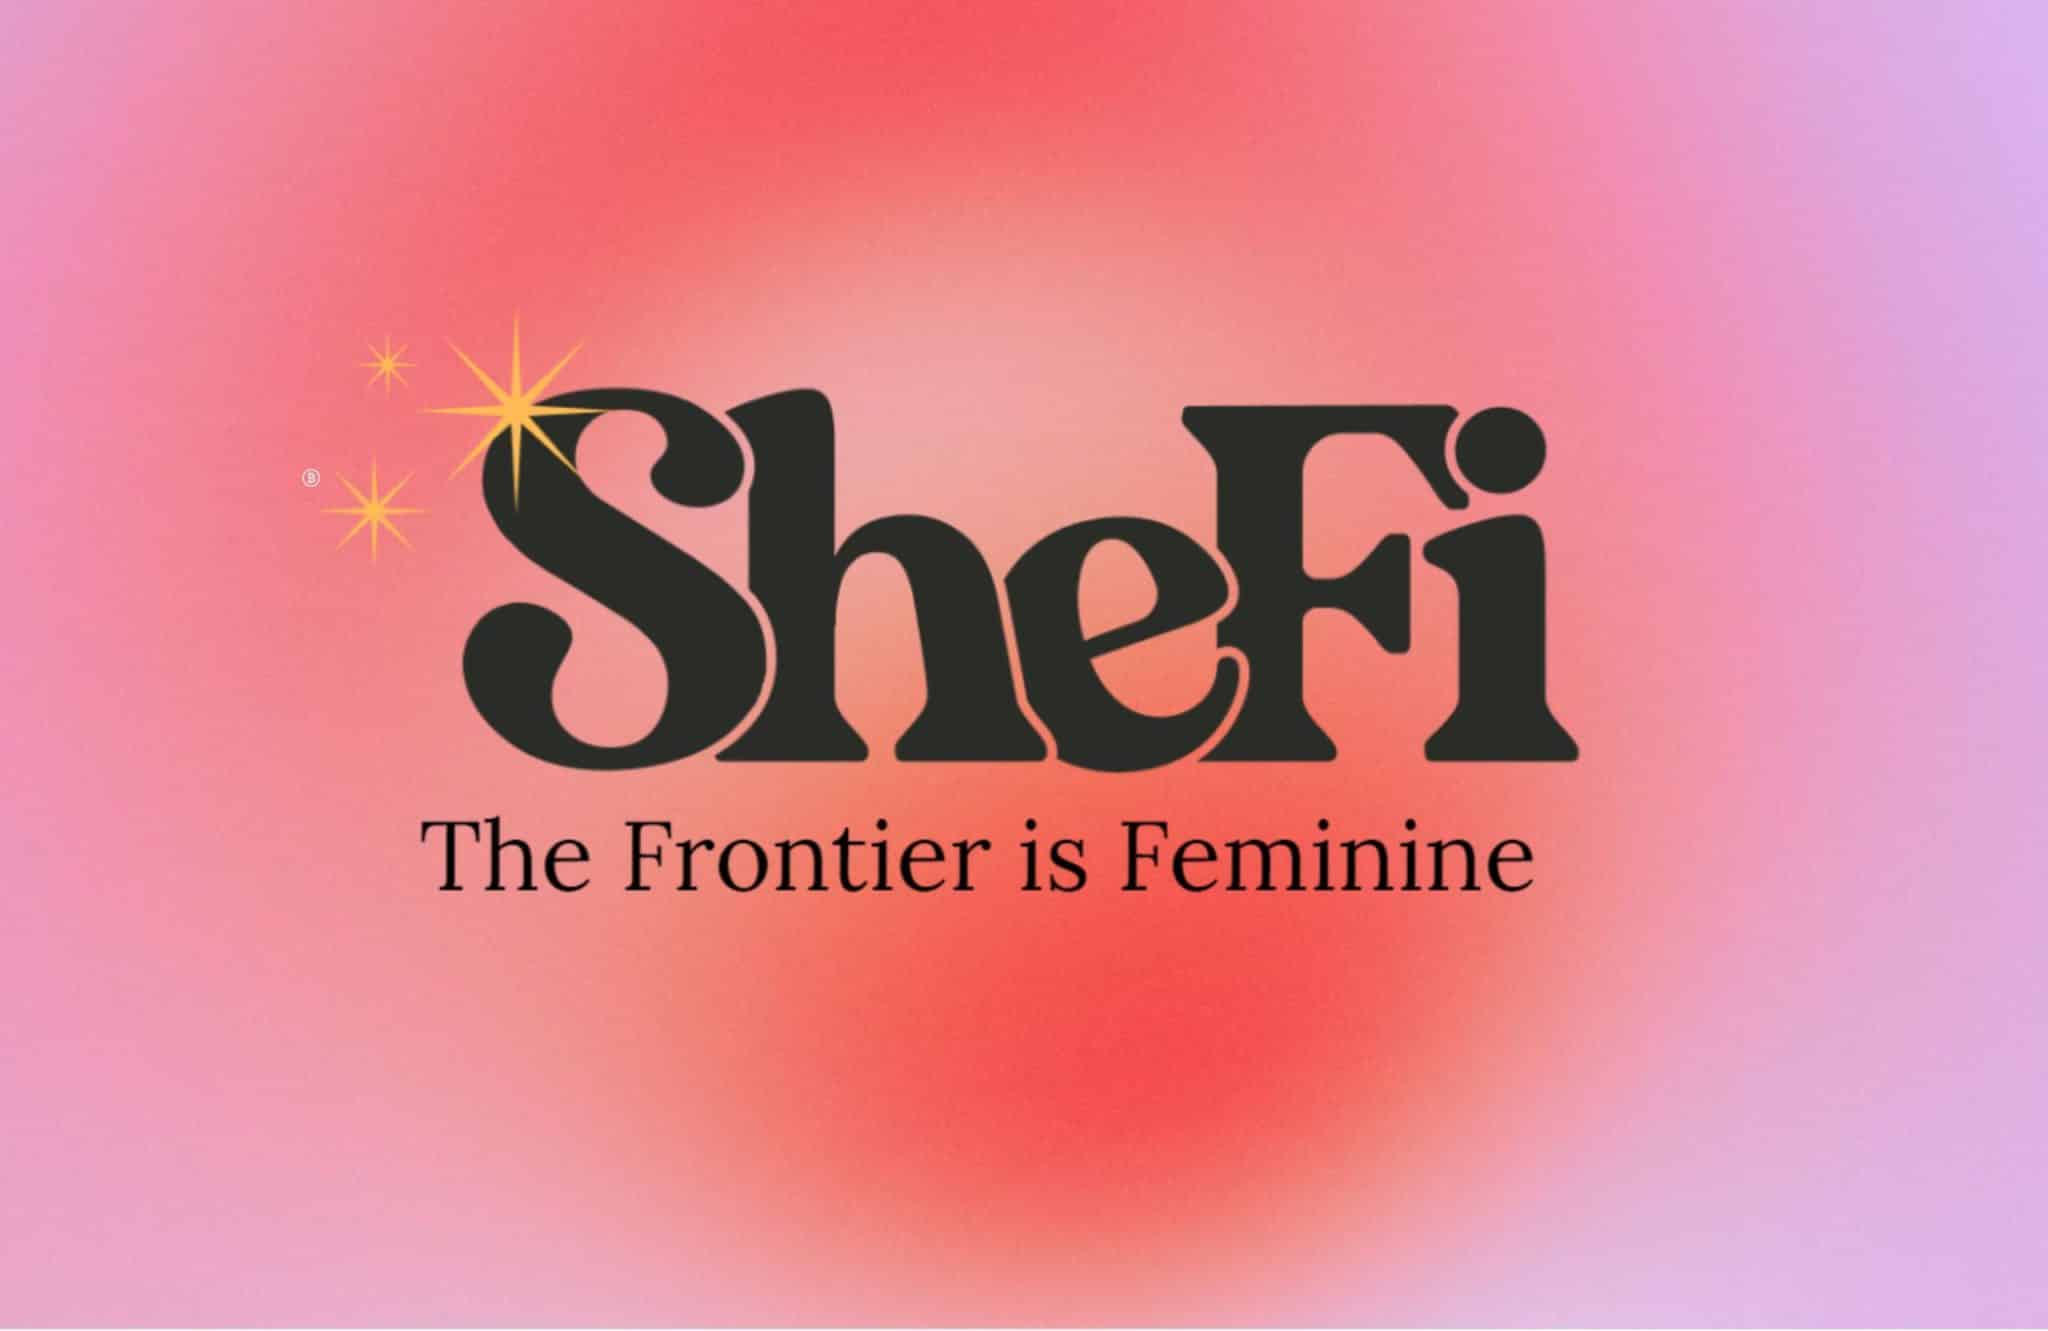 SheFi: Carving out space for women in crypto. Join SheFi's eight-week BootCamp for women and become a master of blockchain technology.